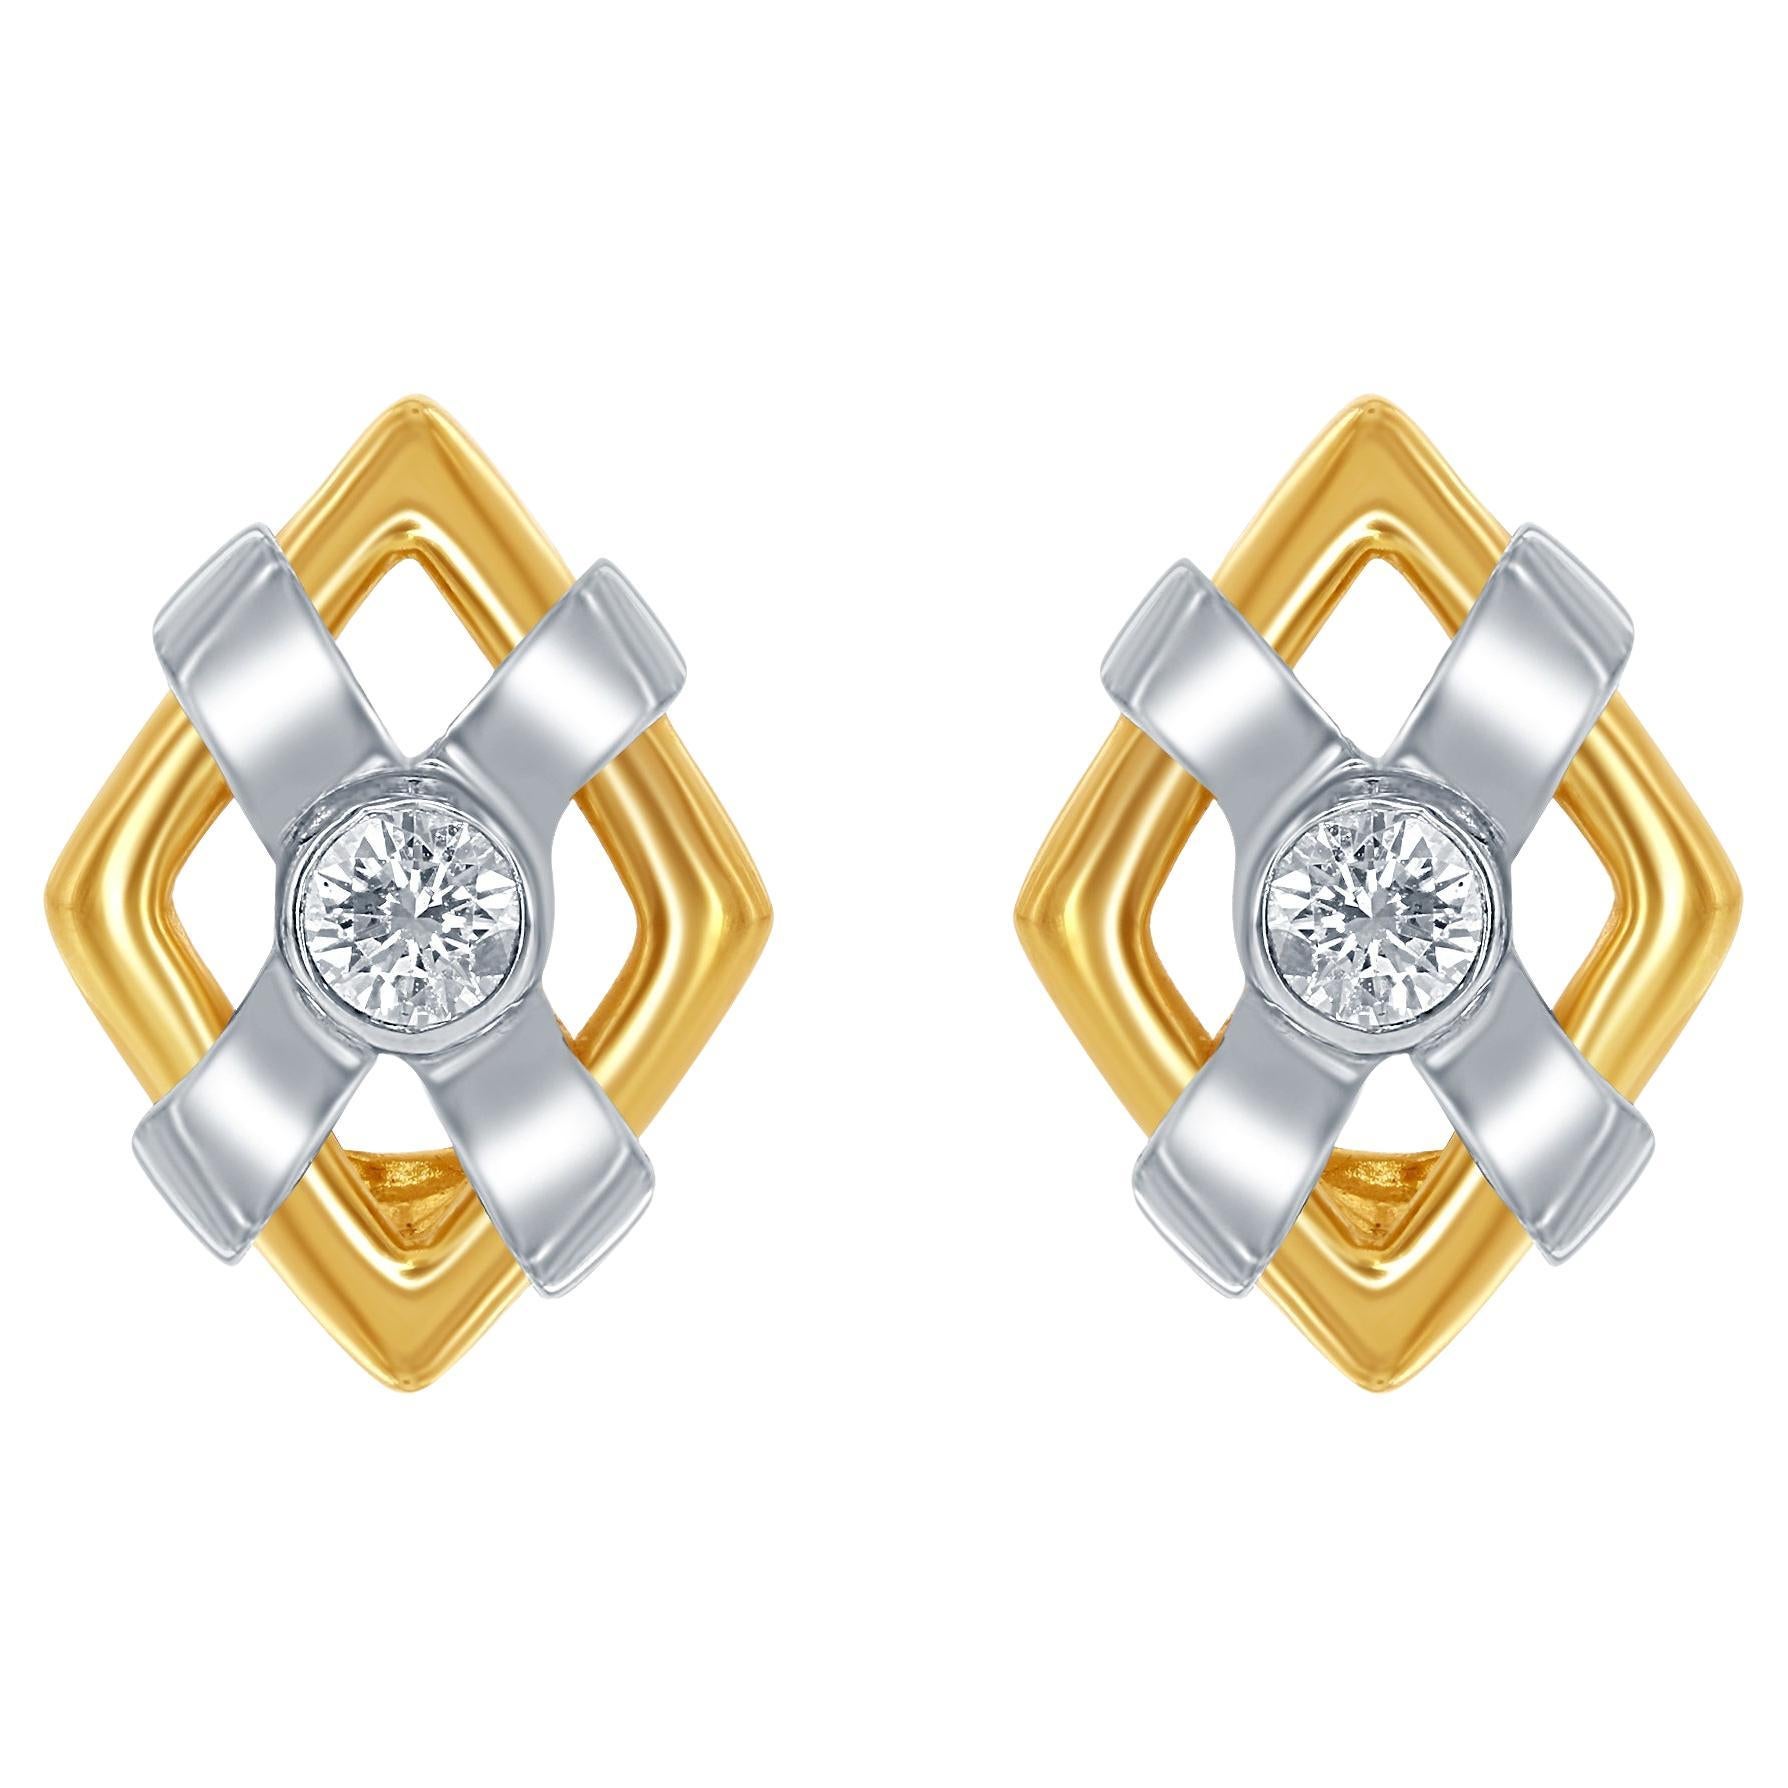 Diana M. 14 kt White and Yellow Gold Diamond Earrings Containing 0.50 cts 